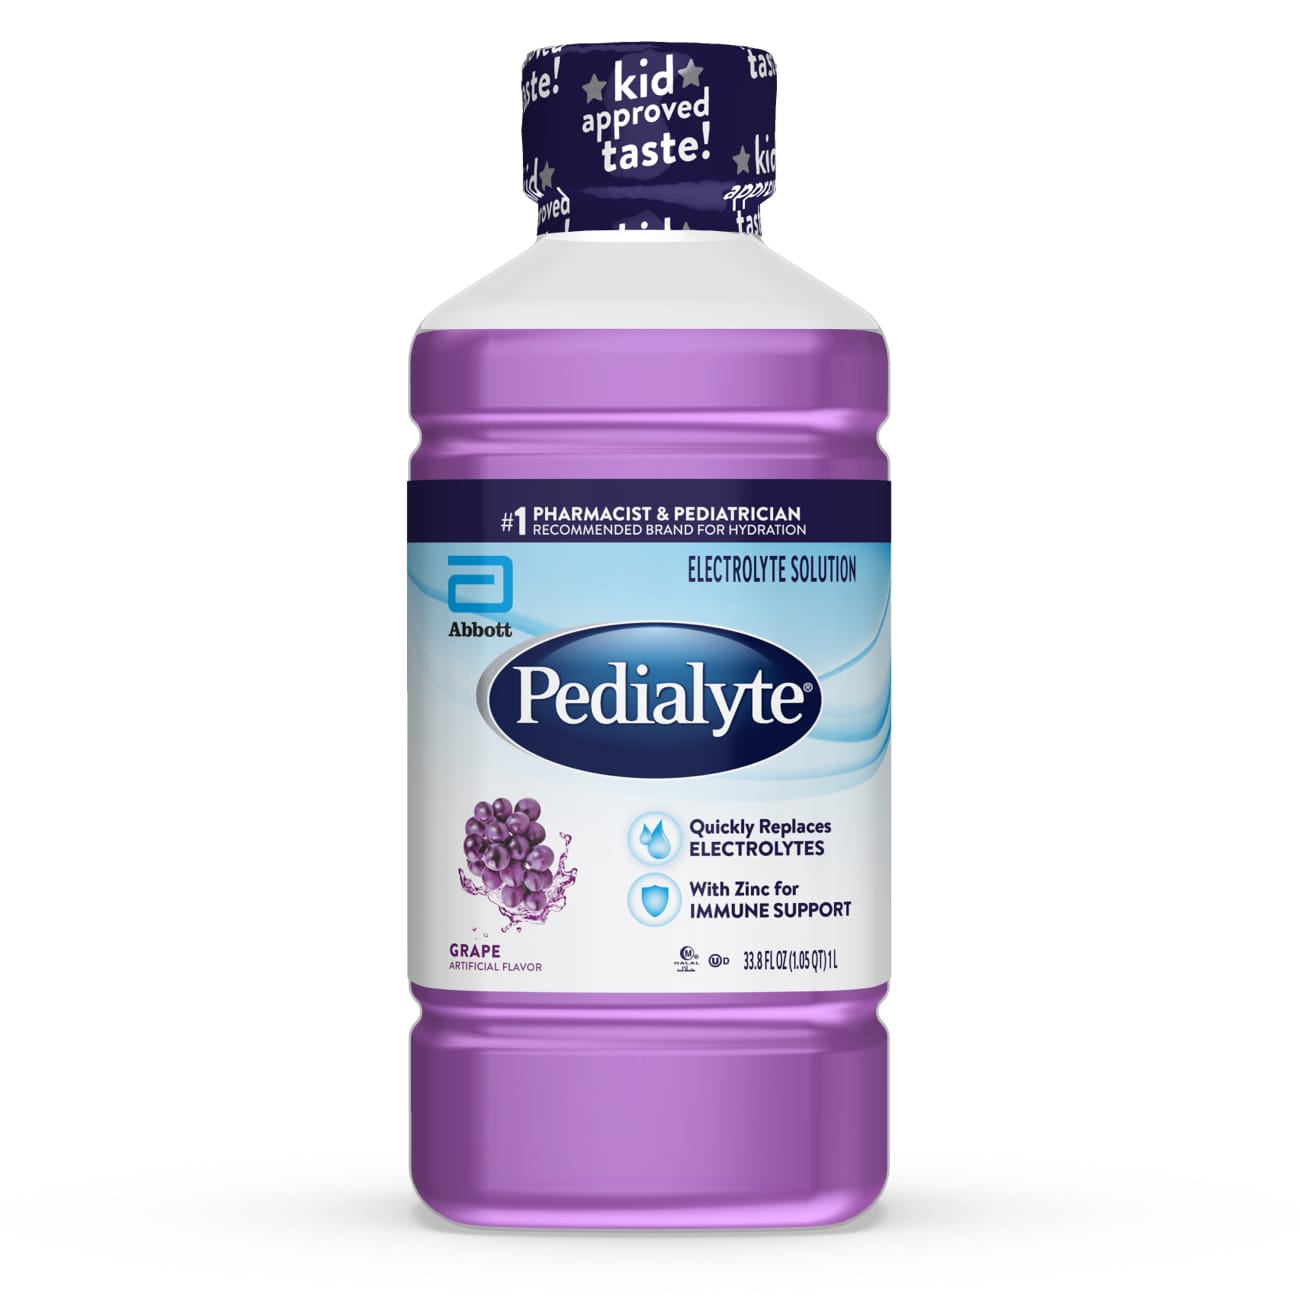 Pedialyte Electrolyte Solution Ready-to-Drink 1.1 qt, 1CT